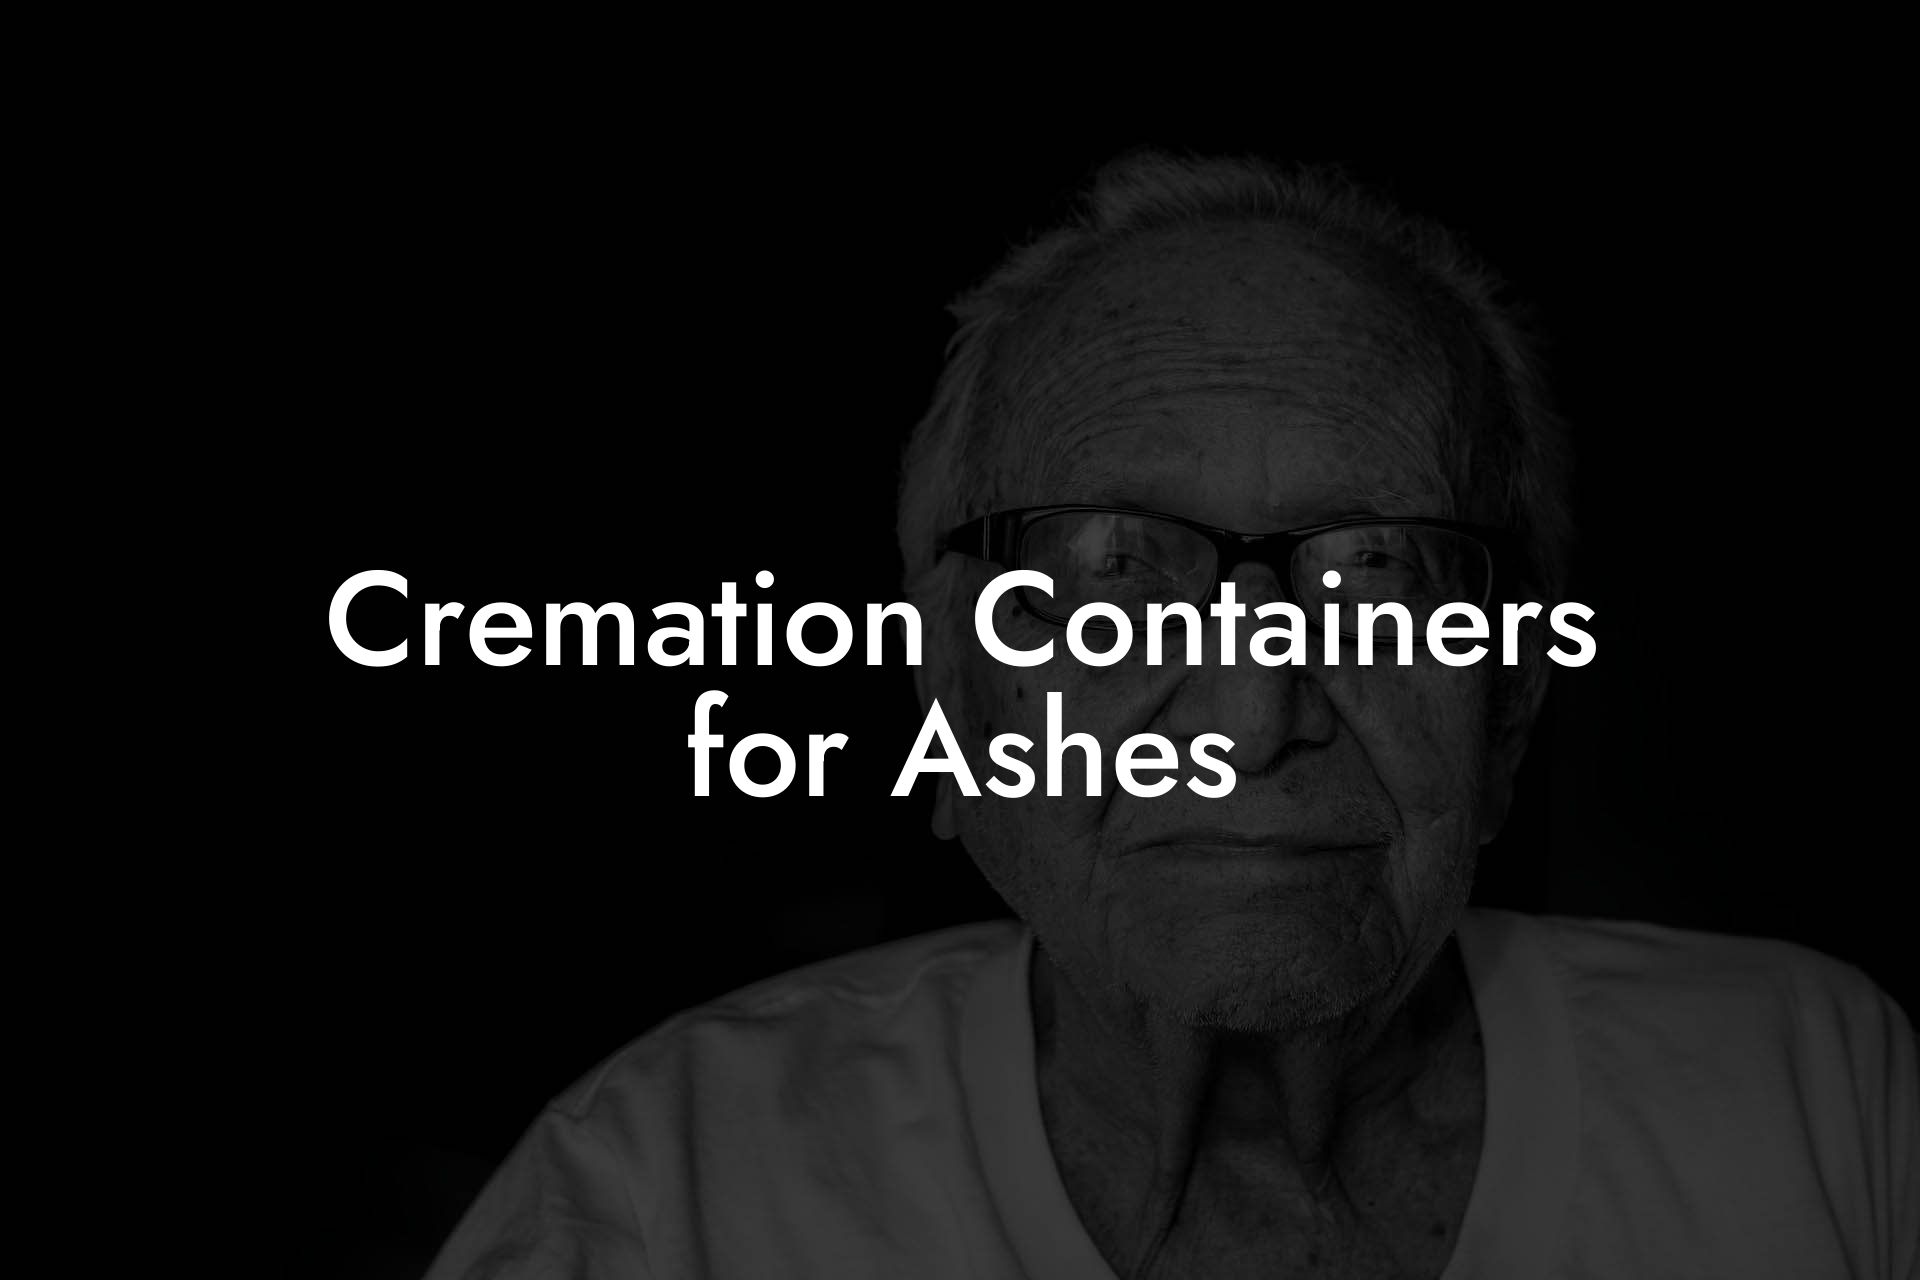 Cremation Containers for Ashes